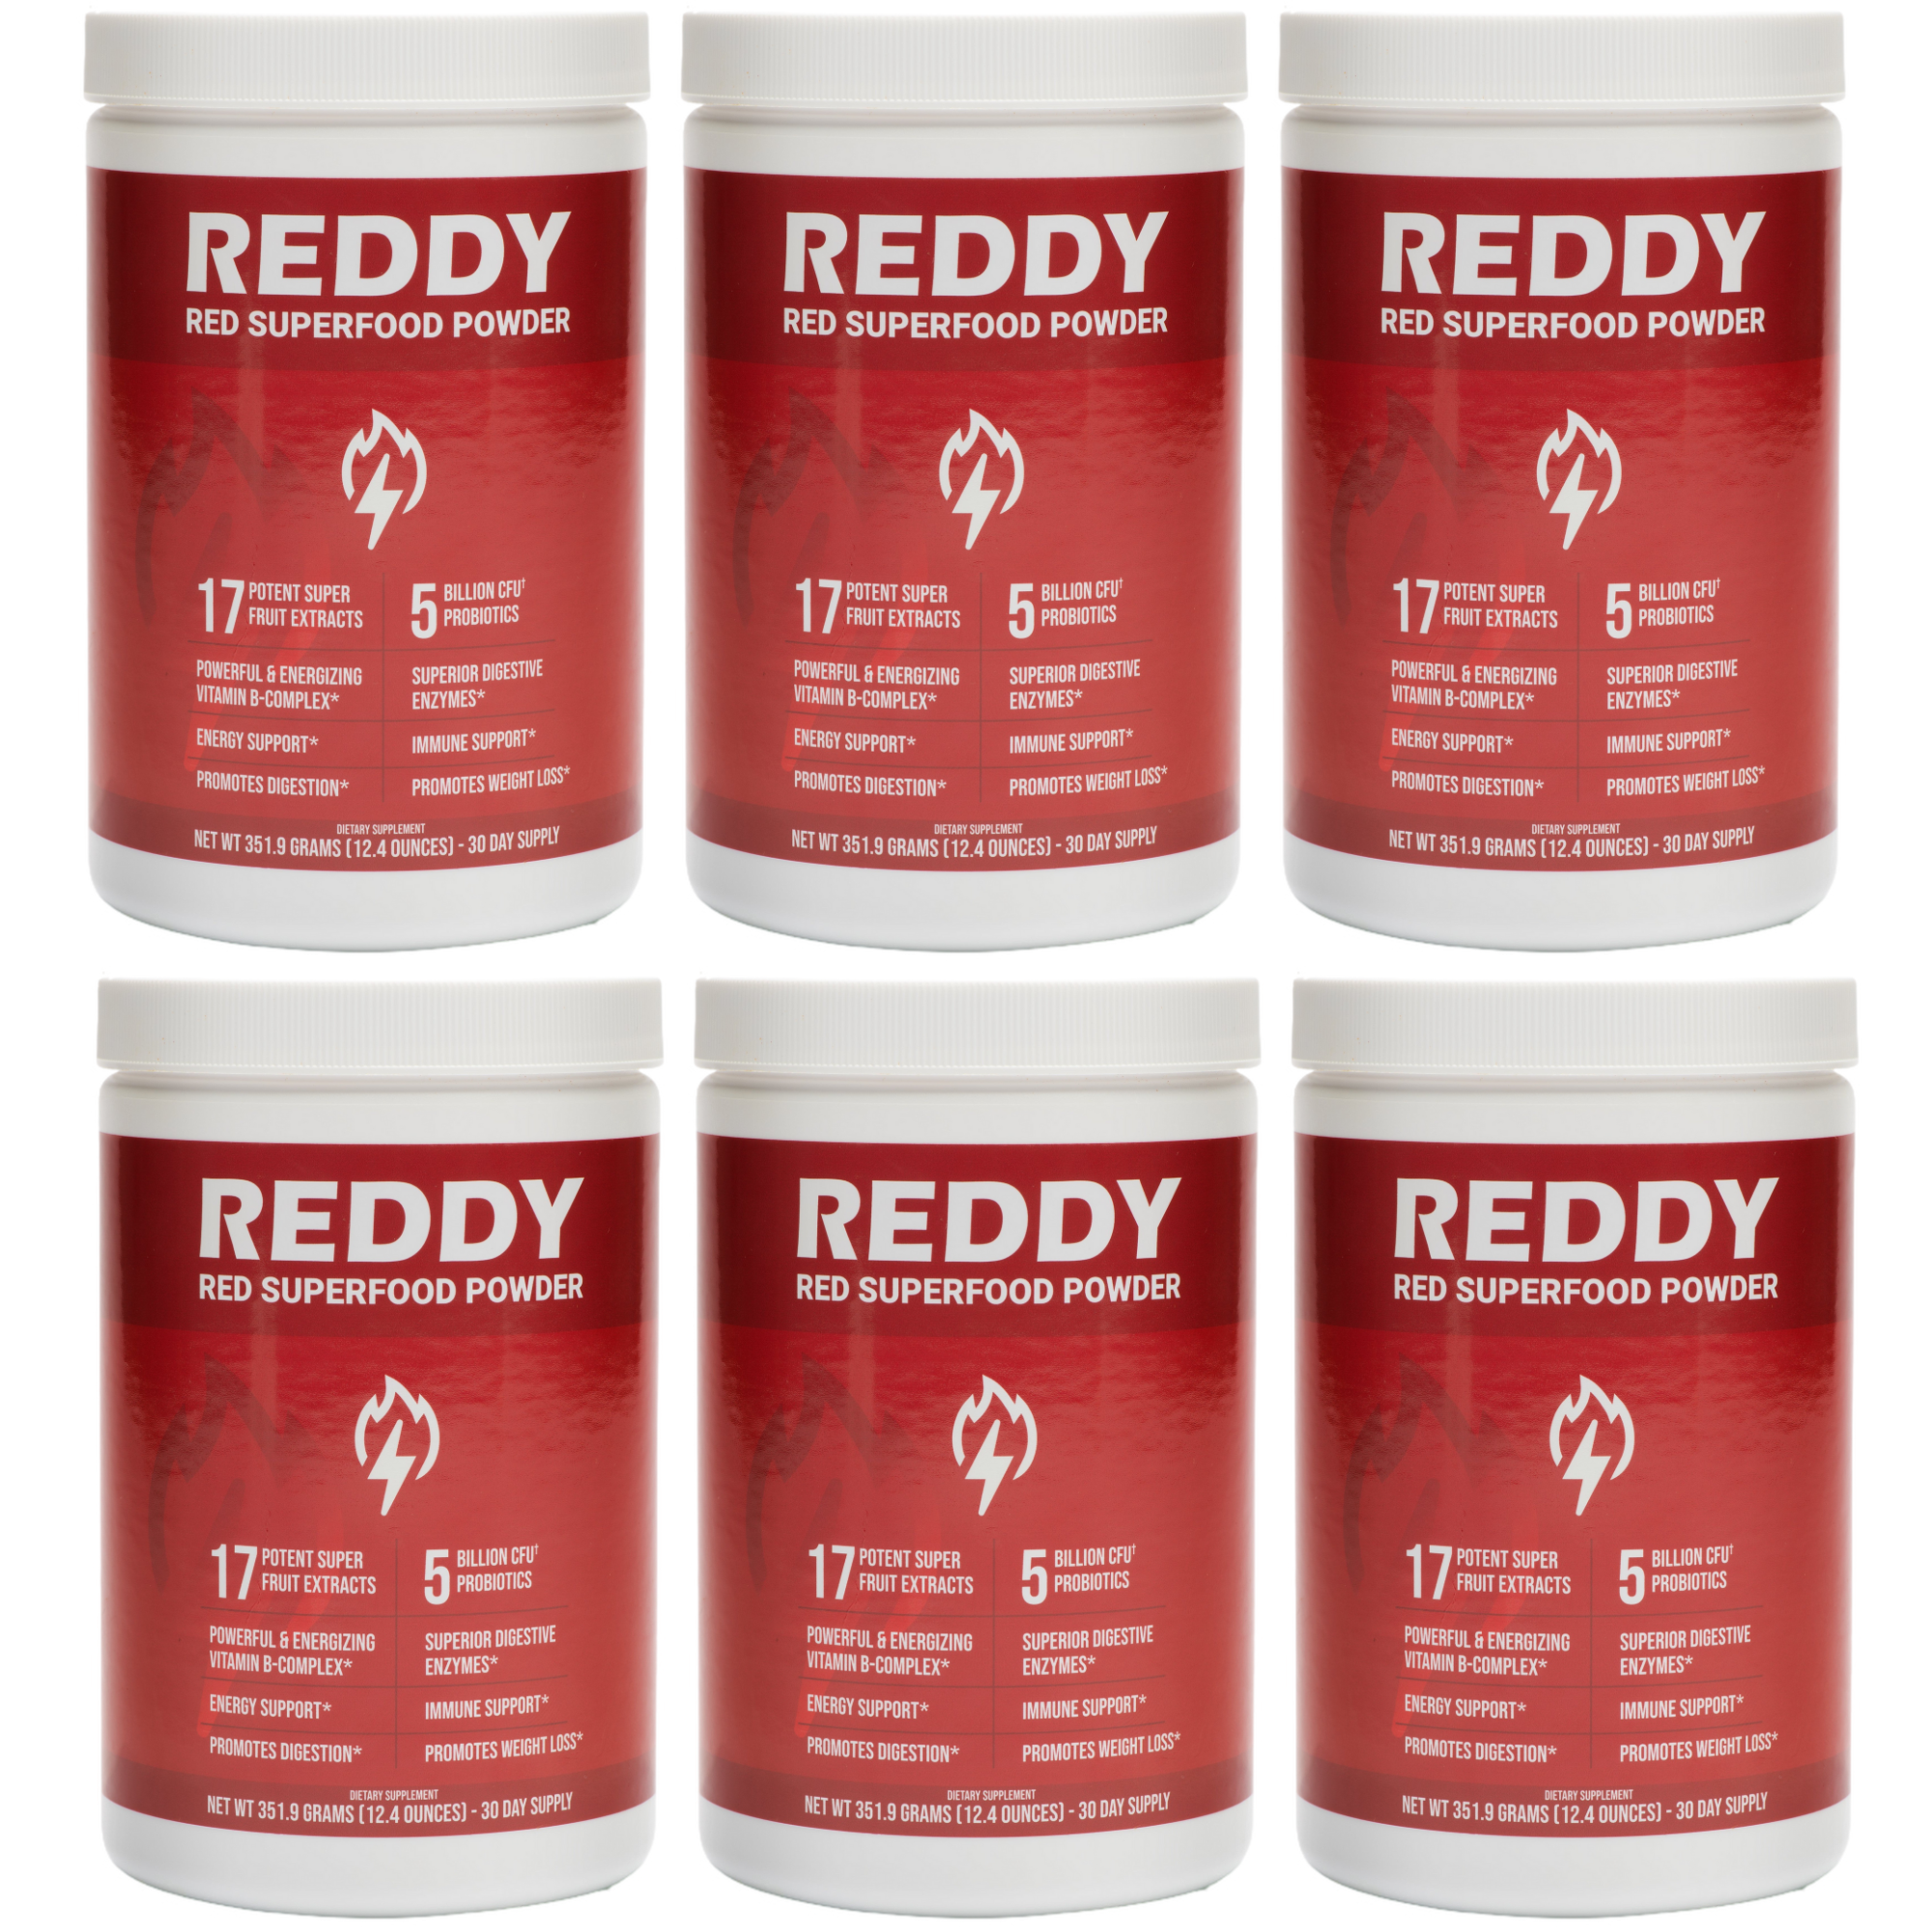 Multiple containers of 'REDDY Red Superfood Powder' supplements against a white background.